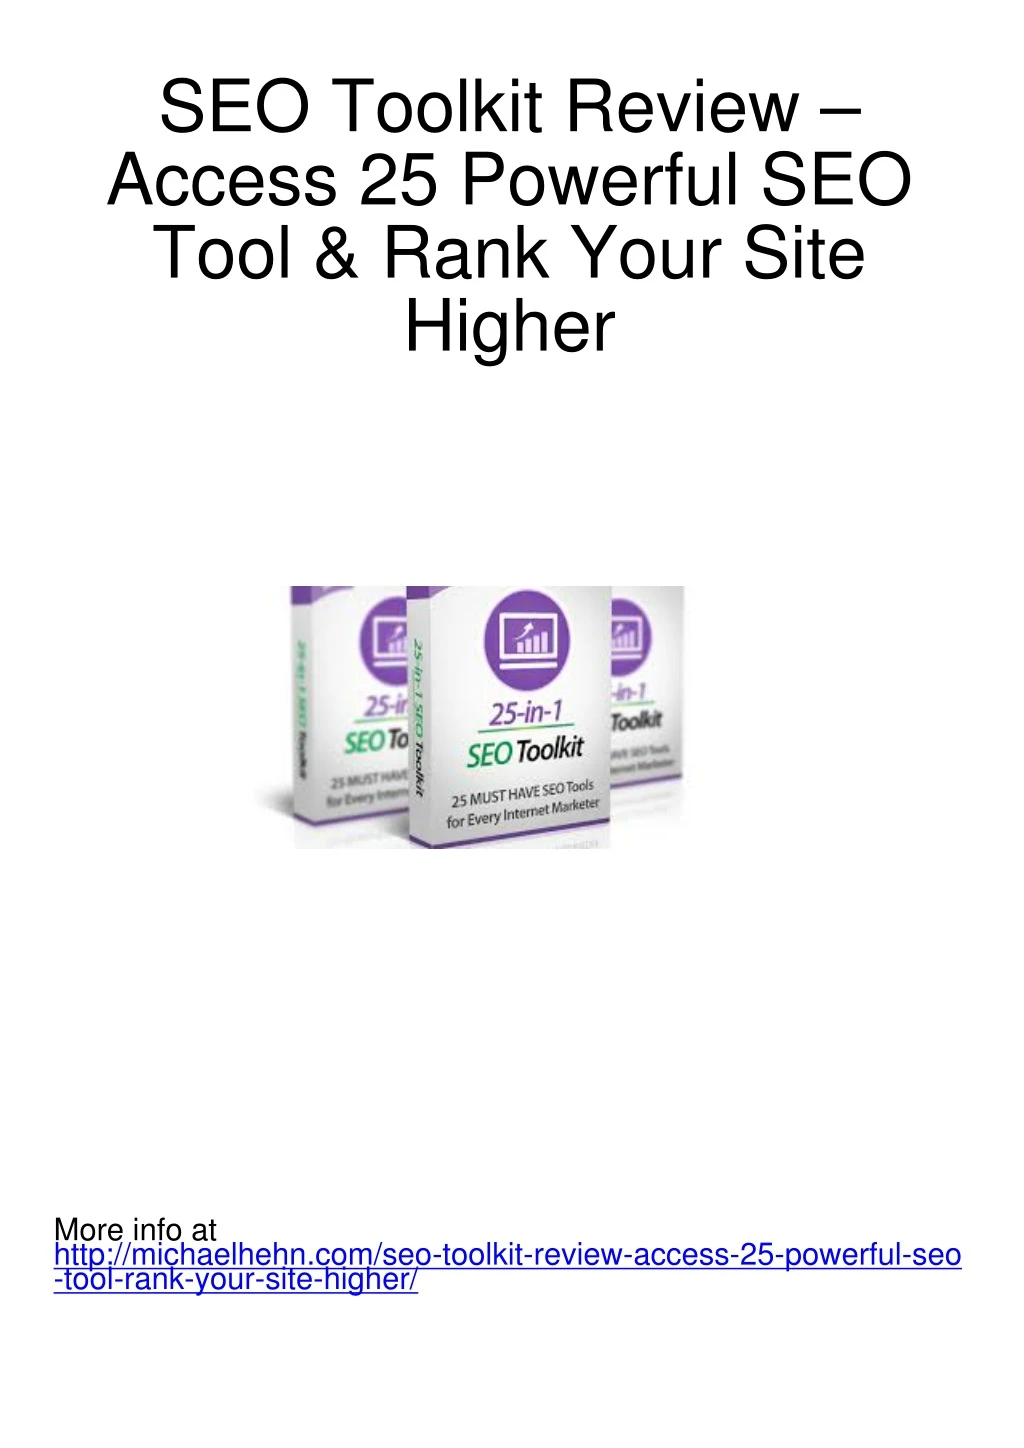 seo toolkit review access 25 powerful seo tool